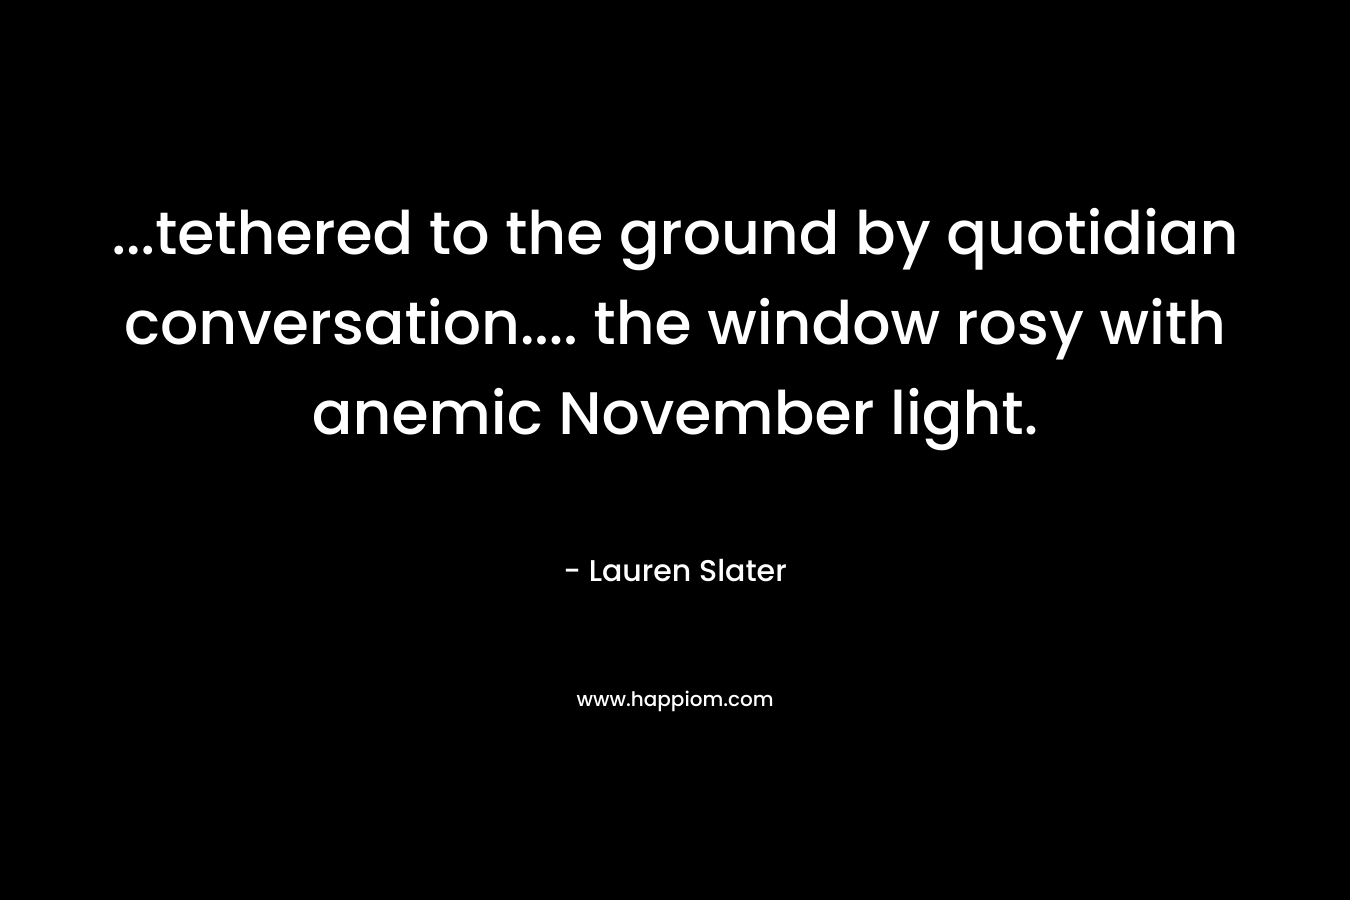 ...tethered to the ground by quotidian conversation.... the window rosy with anemic November light.